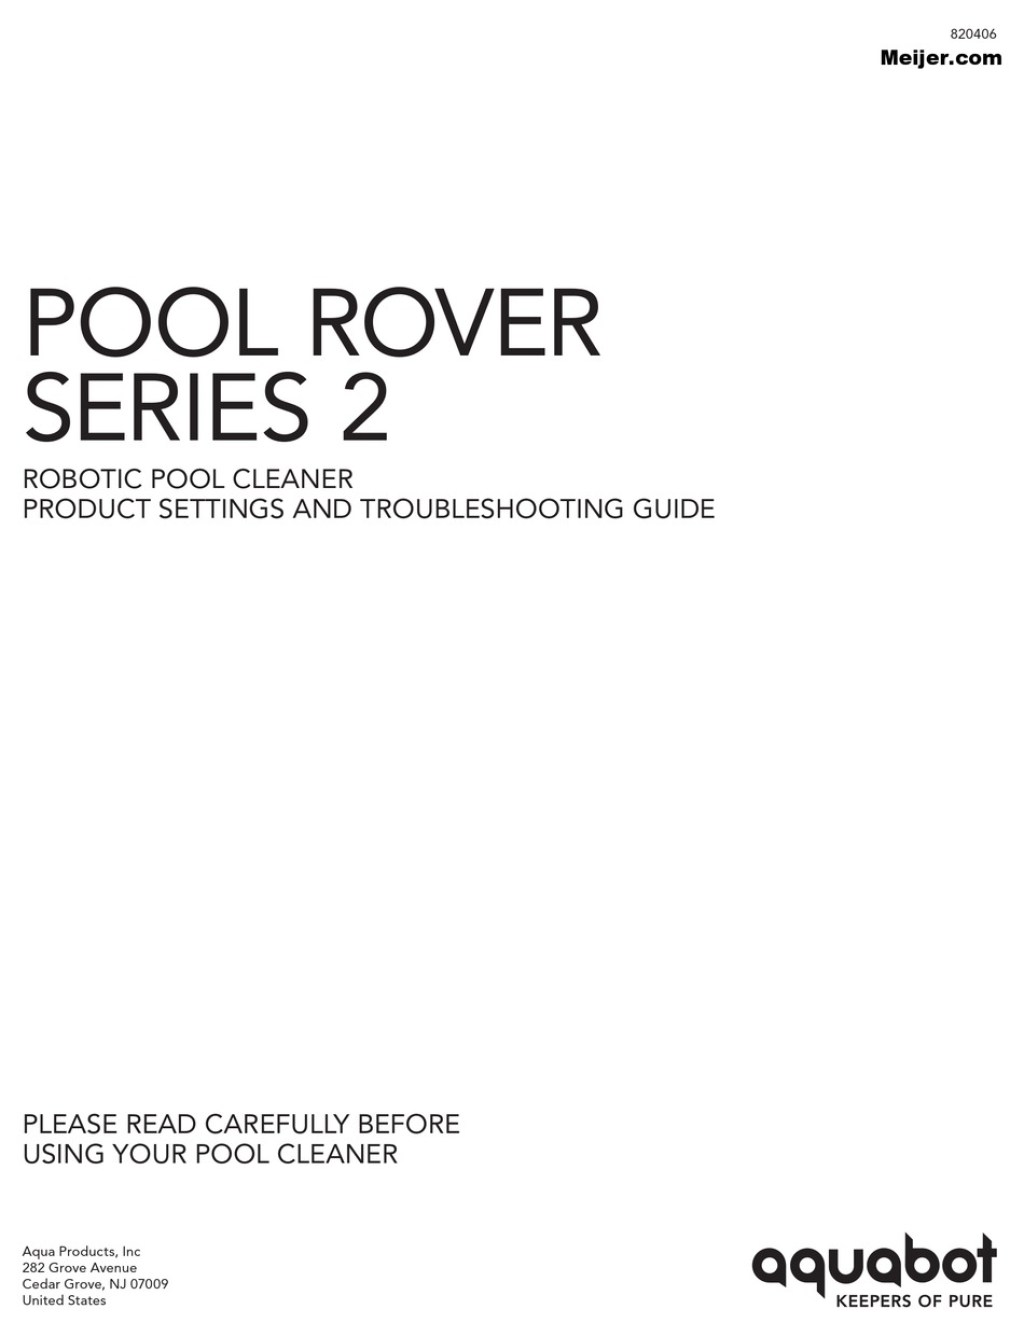 Picture of: AQUABOT POOL ROVER SERIES  PRODUCT SETTINGS AND TROUBLESHOOTING